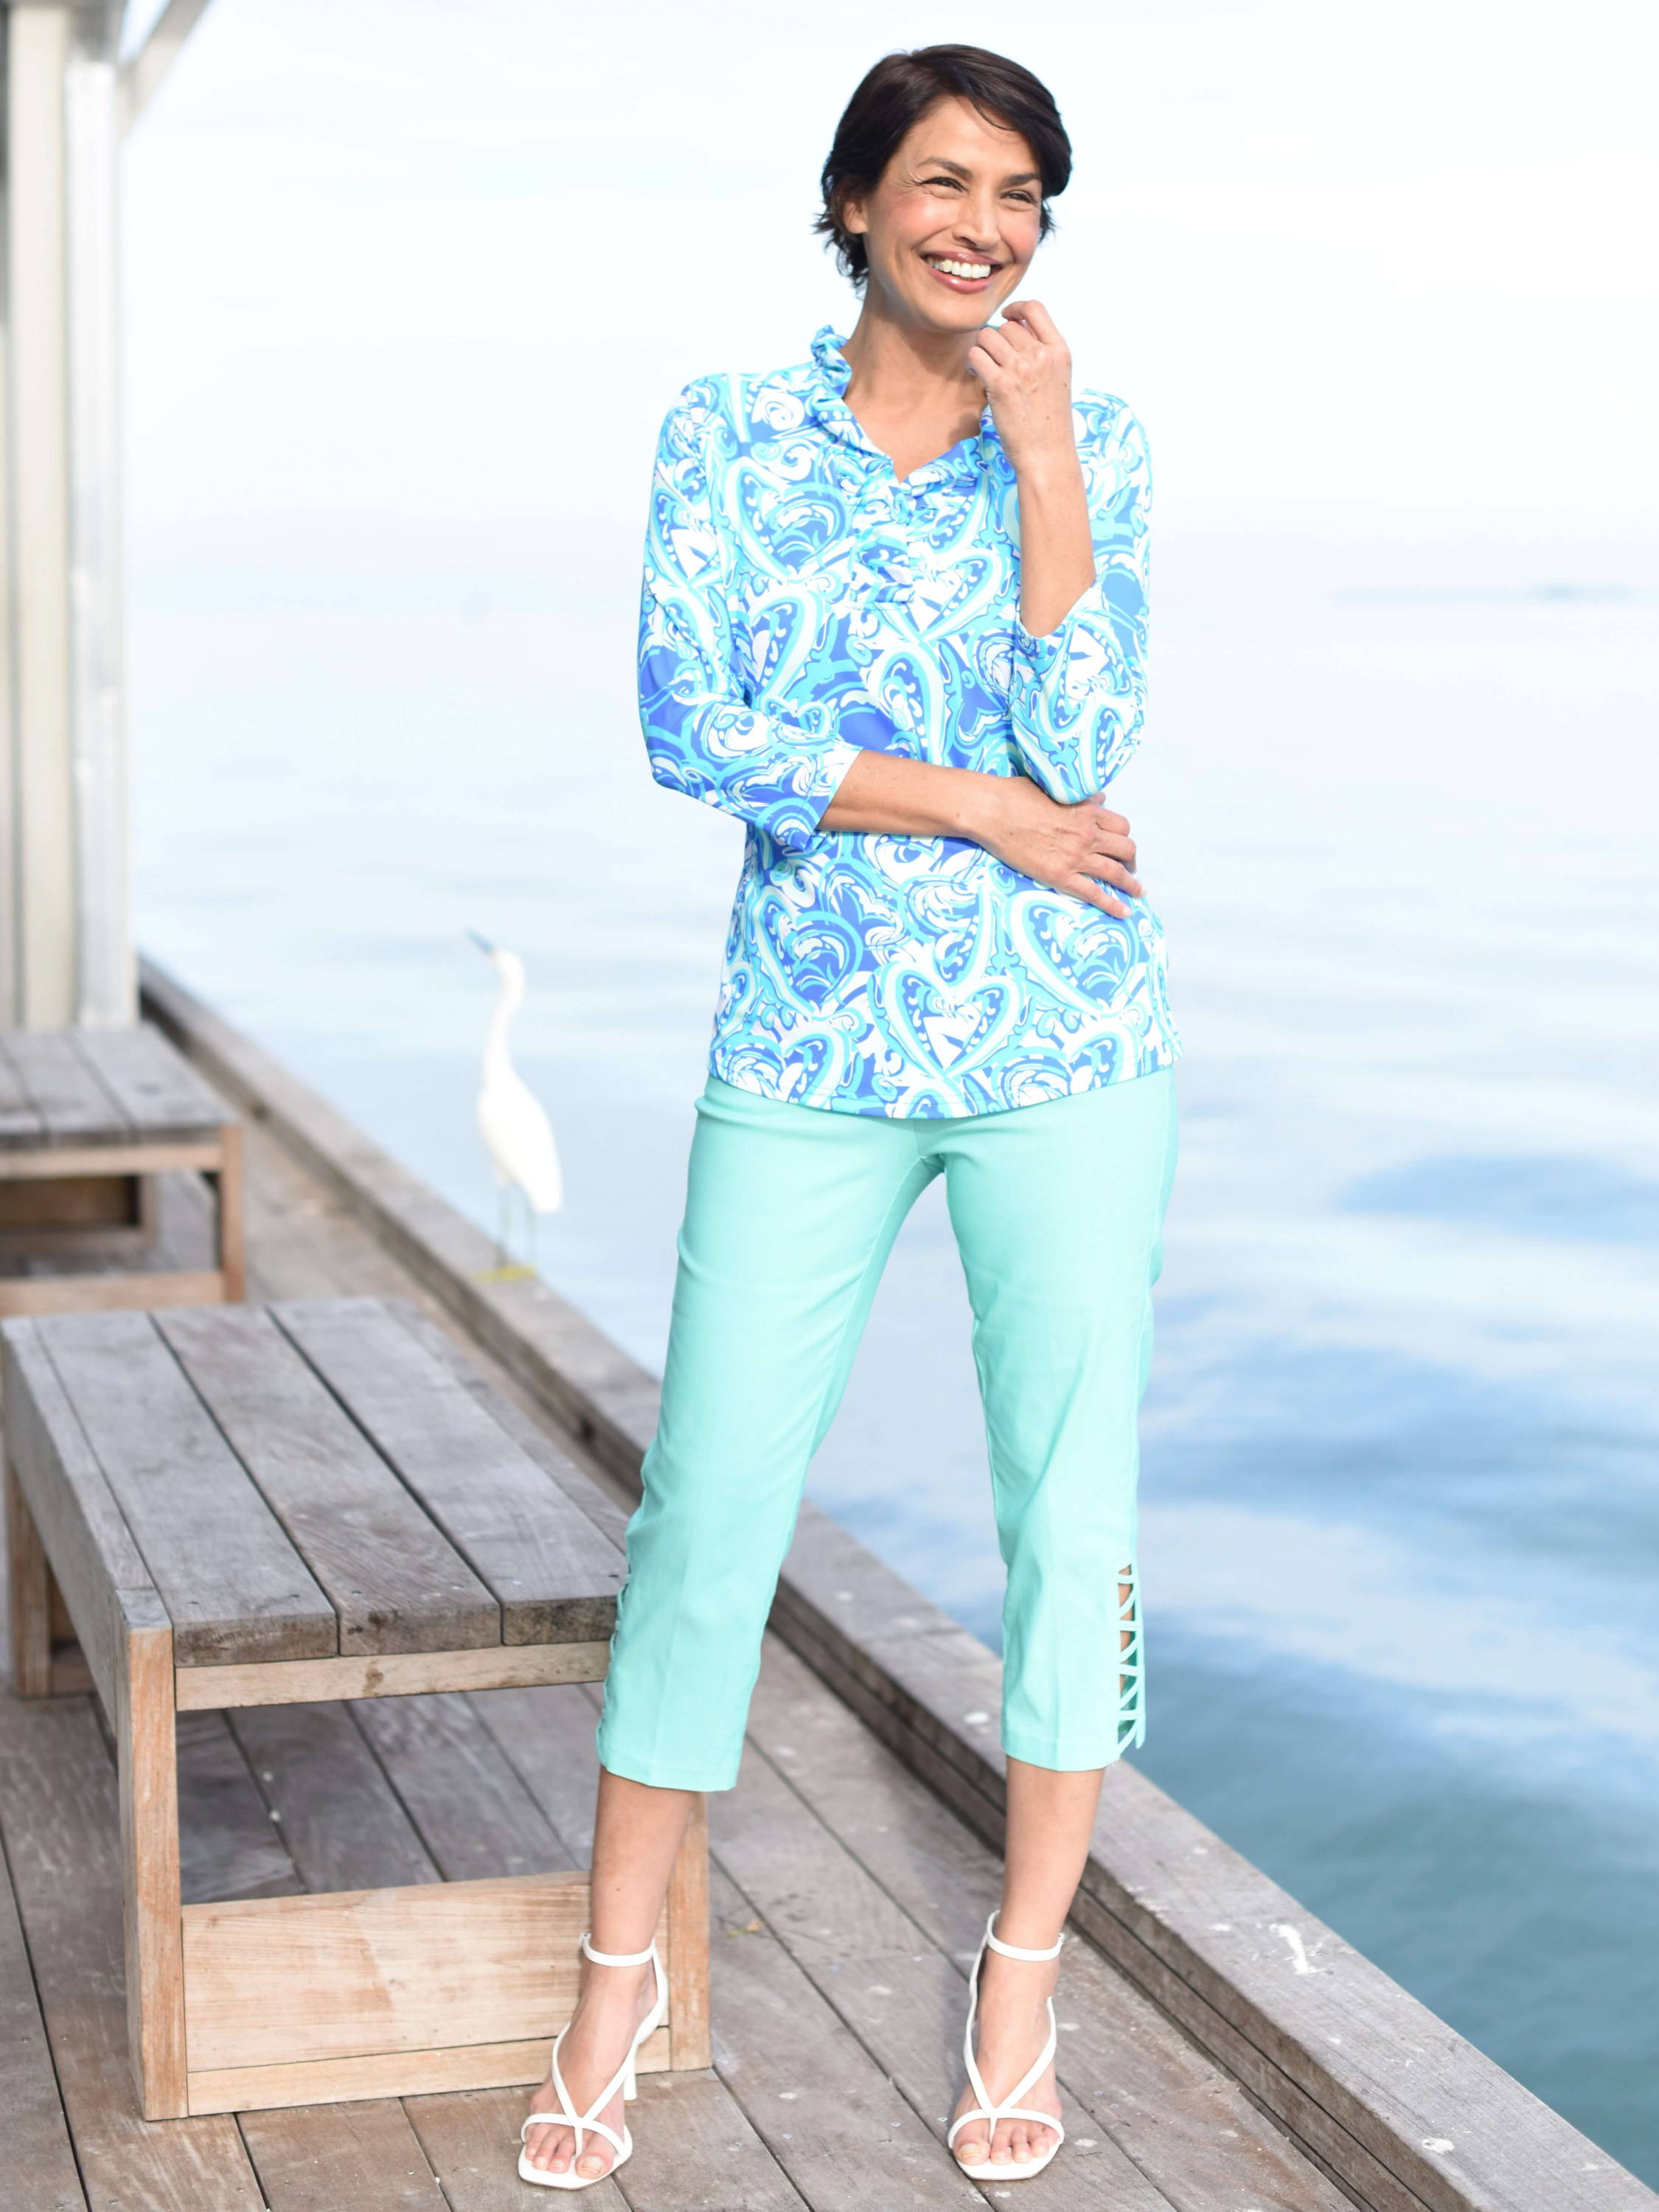 A woman with short dark hair wears a blue printed top and seafoam colored pants as she stands on a dock with a heron in the background